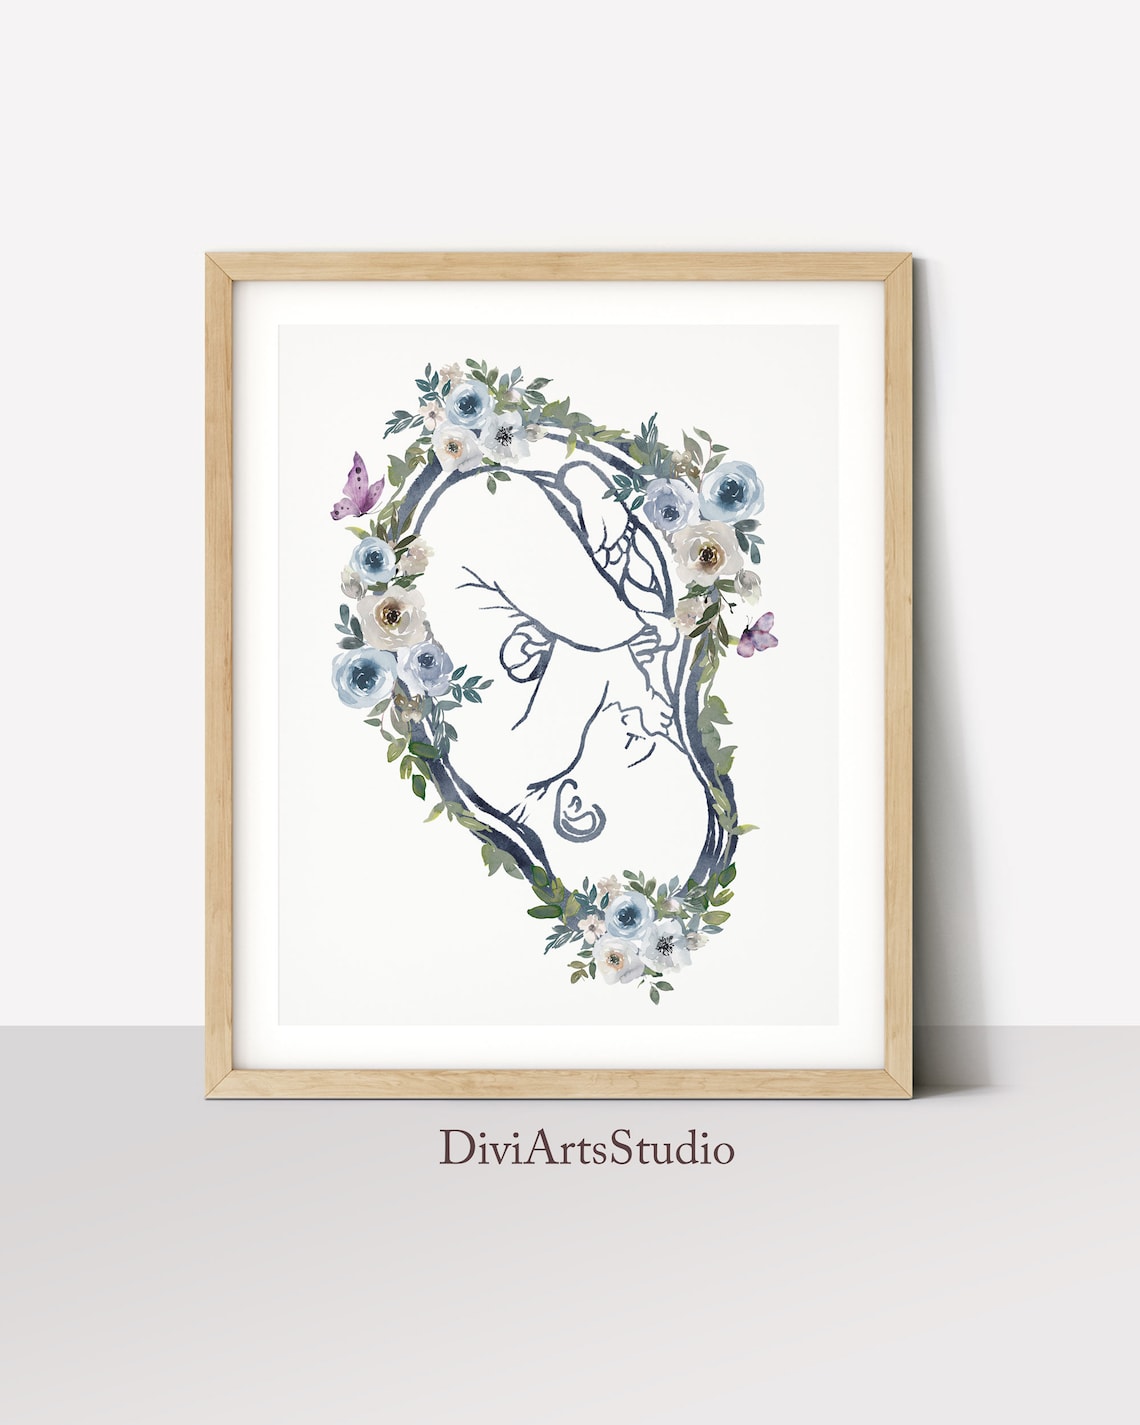 Midwife and Obgyn Art Print - Pregnancy Anatomy Gift for Doula and Gynecologist - Doctor Office Décor - Set of 3